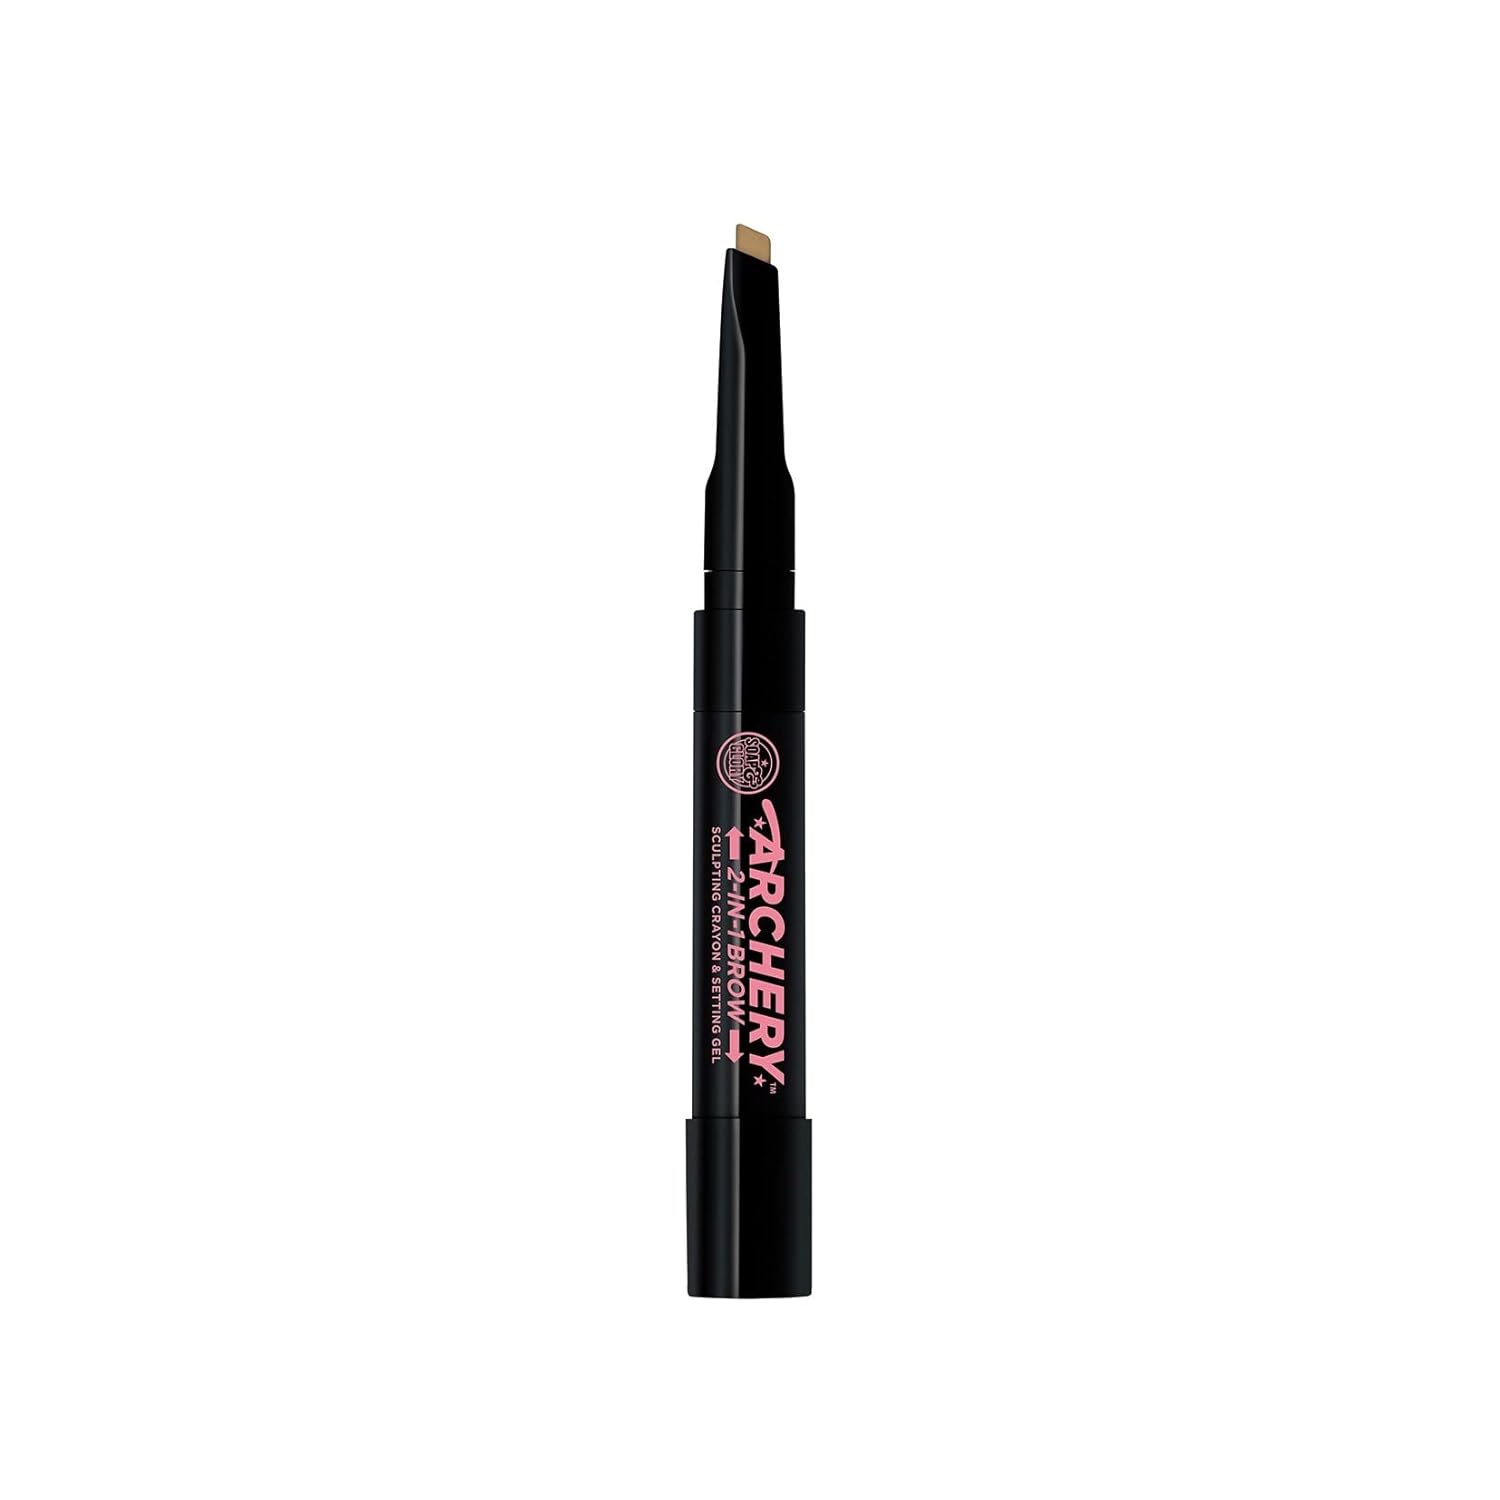 Soap & Glory Archery 2-In-1 Sculpting Eyebrow Crayon & Setting Gel, Blonde - Double Ended Eyebrow Liner with Brush + Eyebrow Pencil - Brow Gel for All Day Brow Sculpt (1 count)